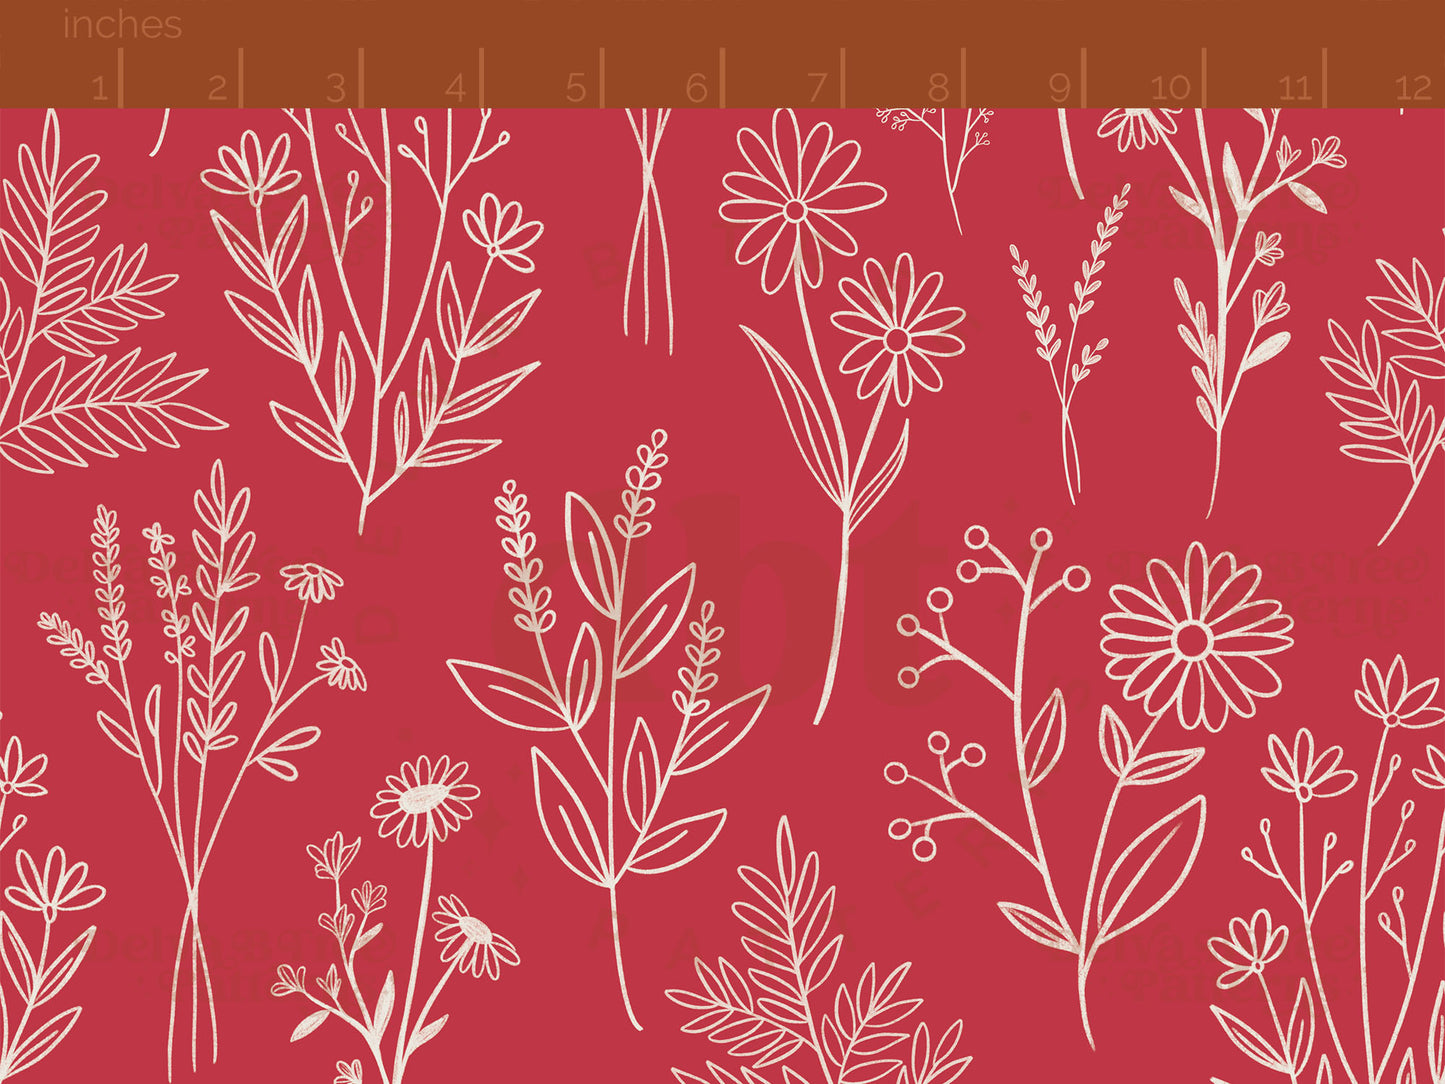 Off white botanical line art wildflowers and leaves on a watermelon red background seamless pattern scale digital file for small shops that make handmade products in small batches.